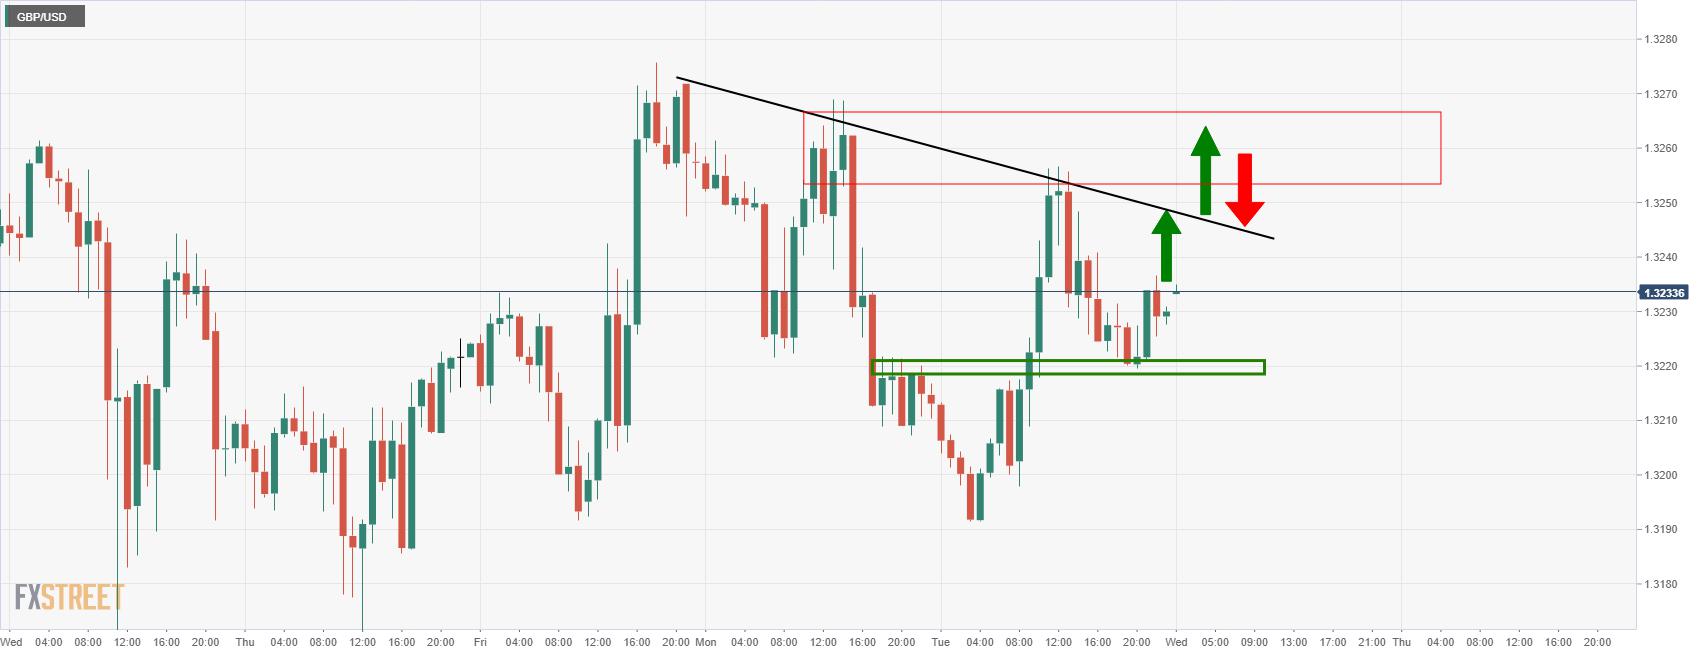 GBP/USD Price Analysis: 1.3250 is important for the day ahead